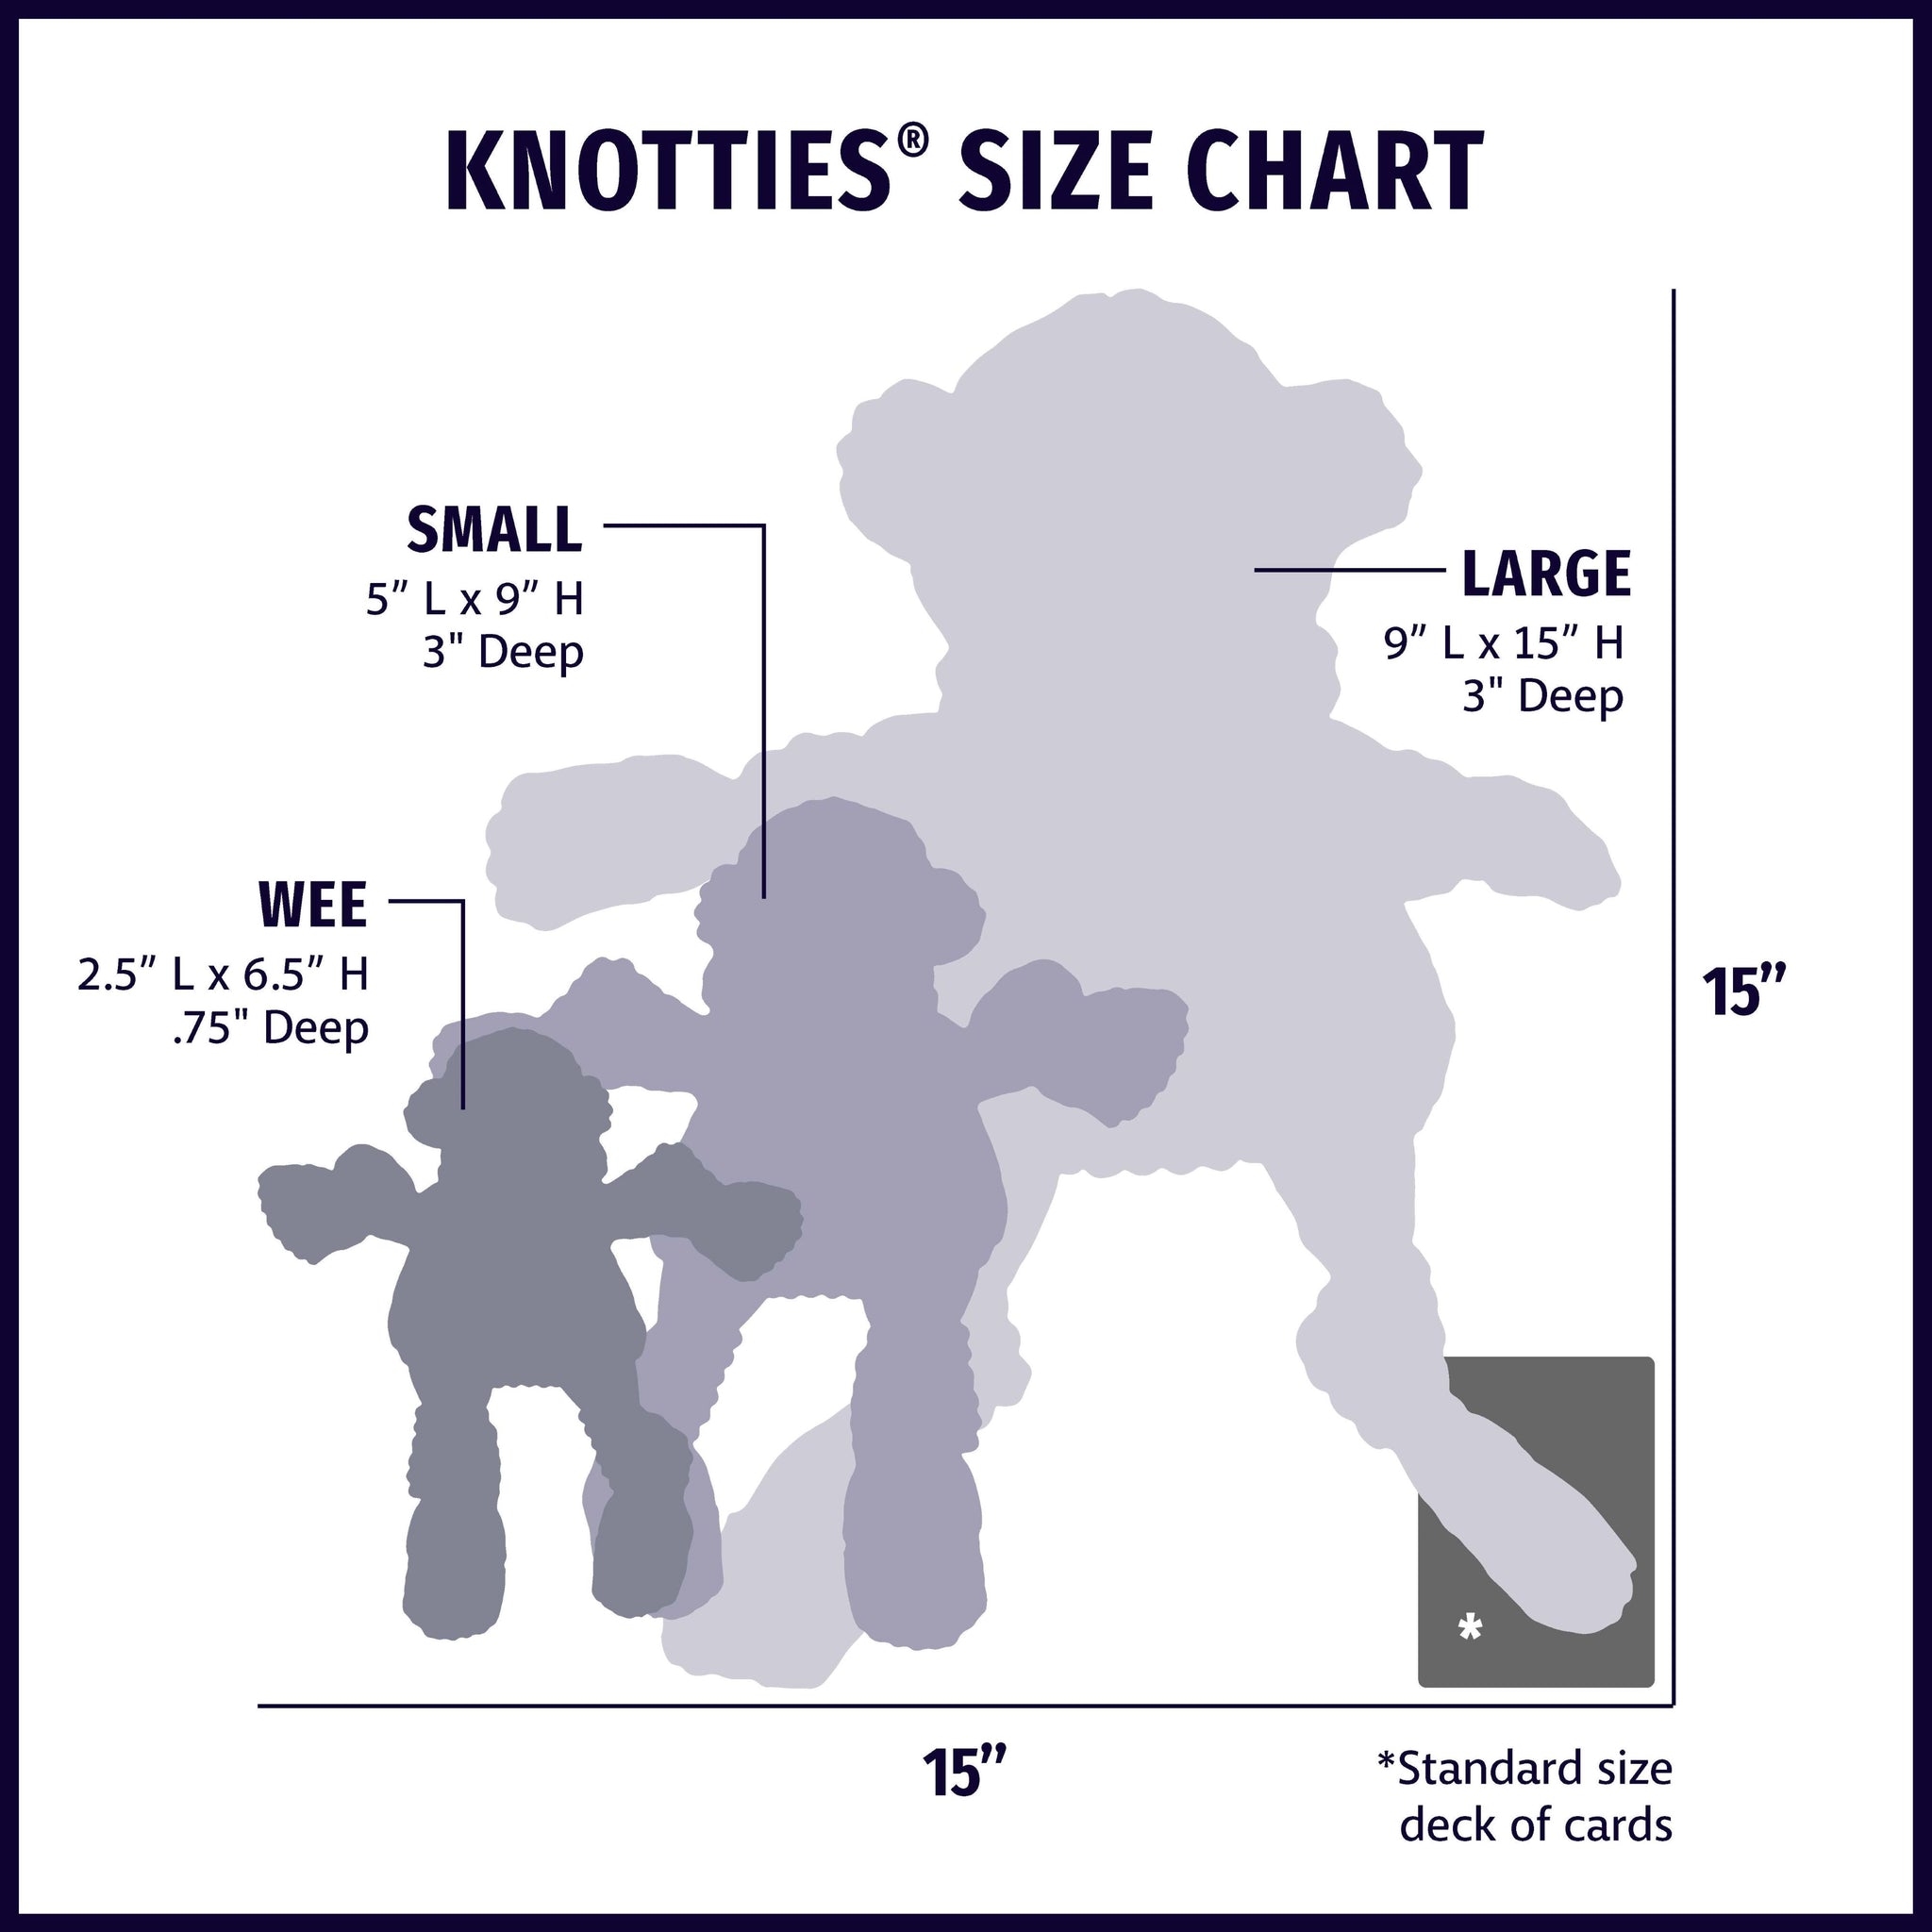 Size chart displaying Knottie® plush dog toy silhouettes in wee, small, and large with approximate dimensions of each size compared to standard size deck of cards.